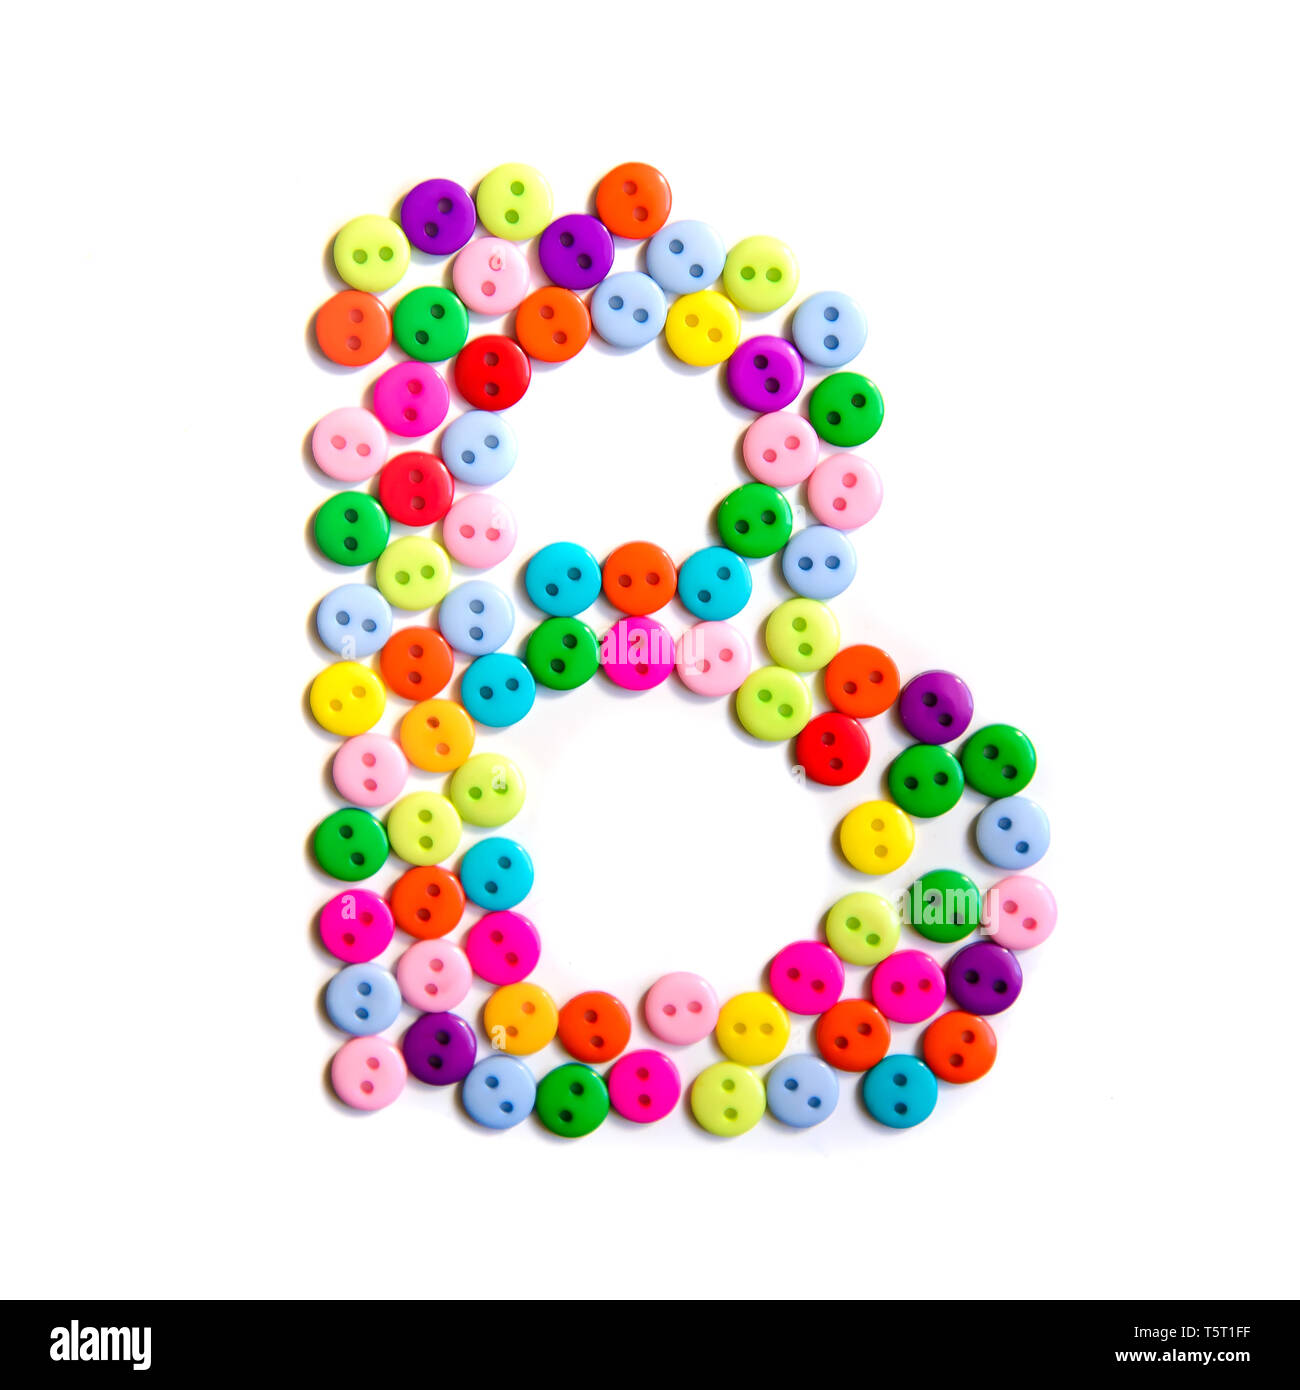 Letter B of the English alphabet from a group of colorful small buttons on a white background Stock Photo